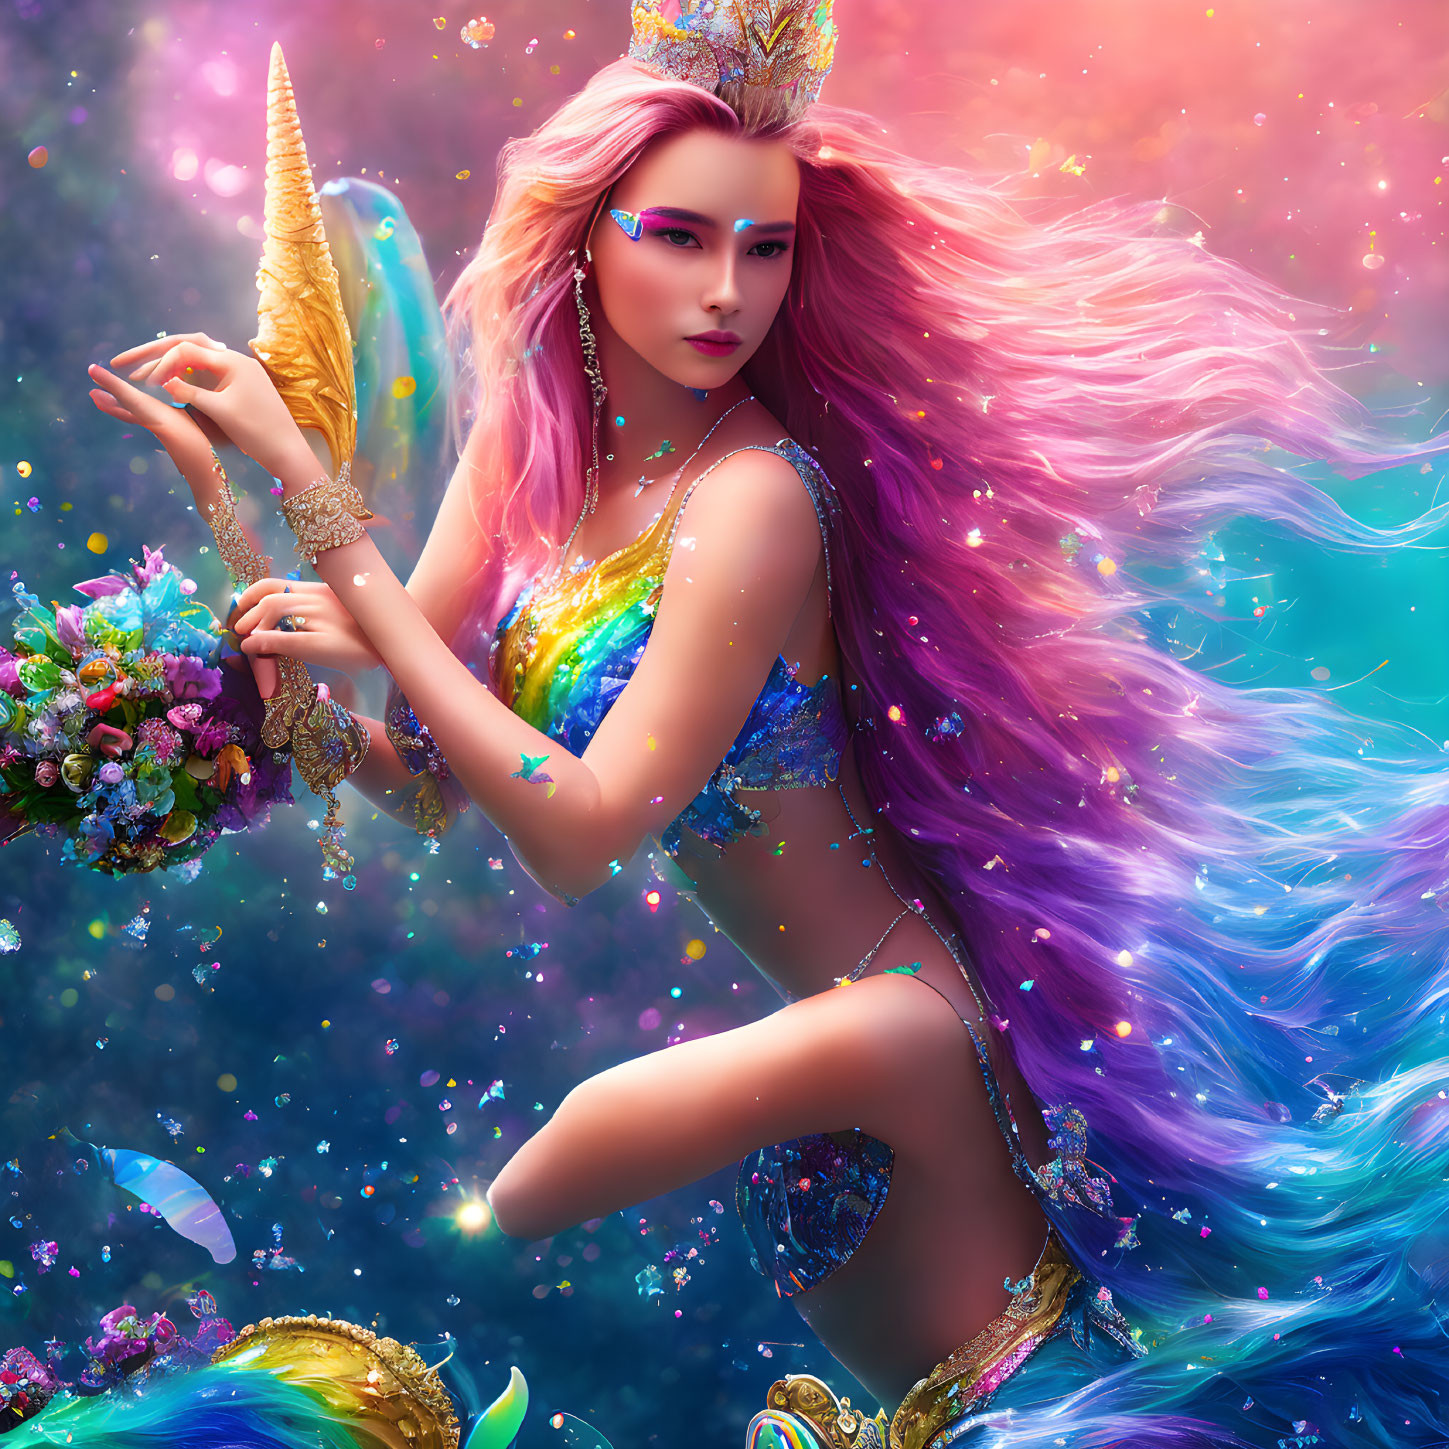 Fantasy-themed image of person with purple hair, mermaid tail, horn, and jewelry on glitter